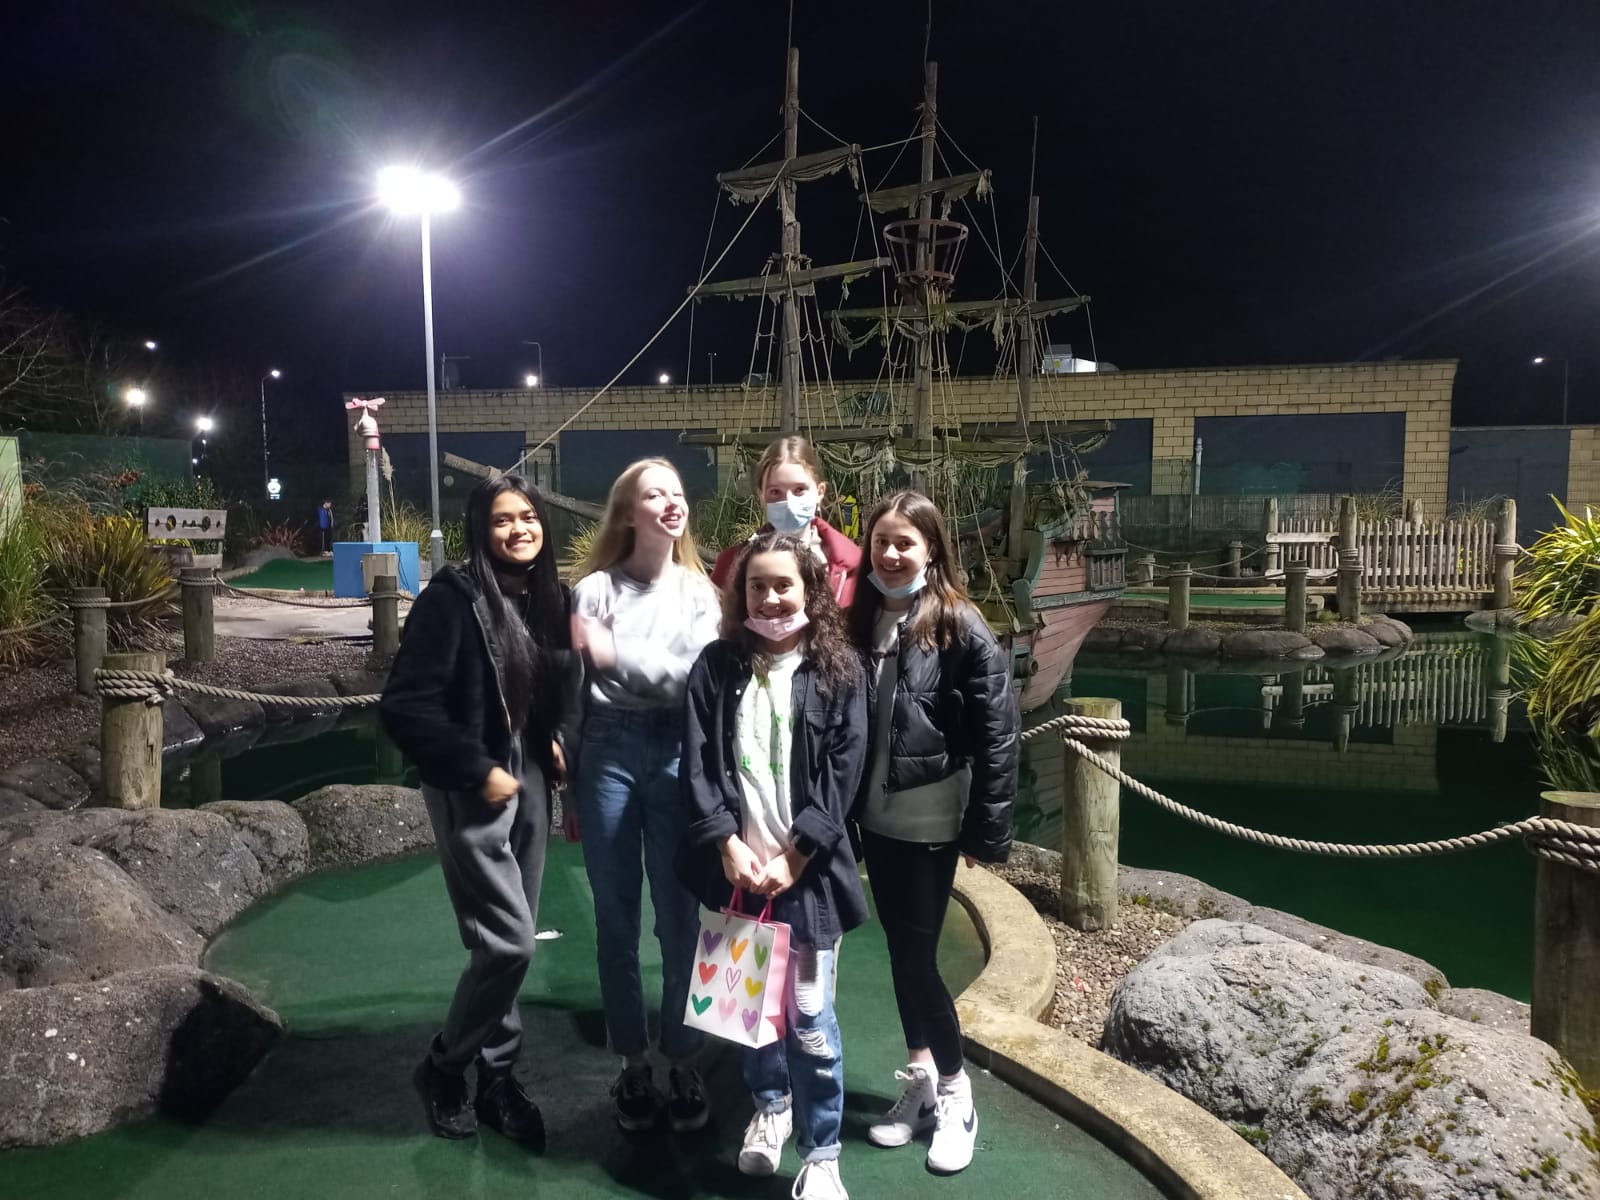 18 Holes of Adventure Golf & a Slush Drink for 4 People